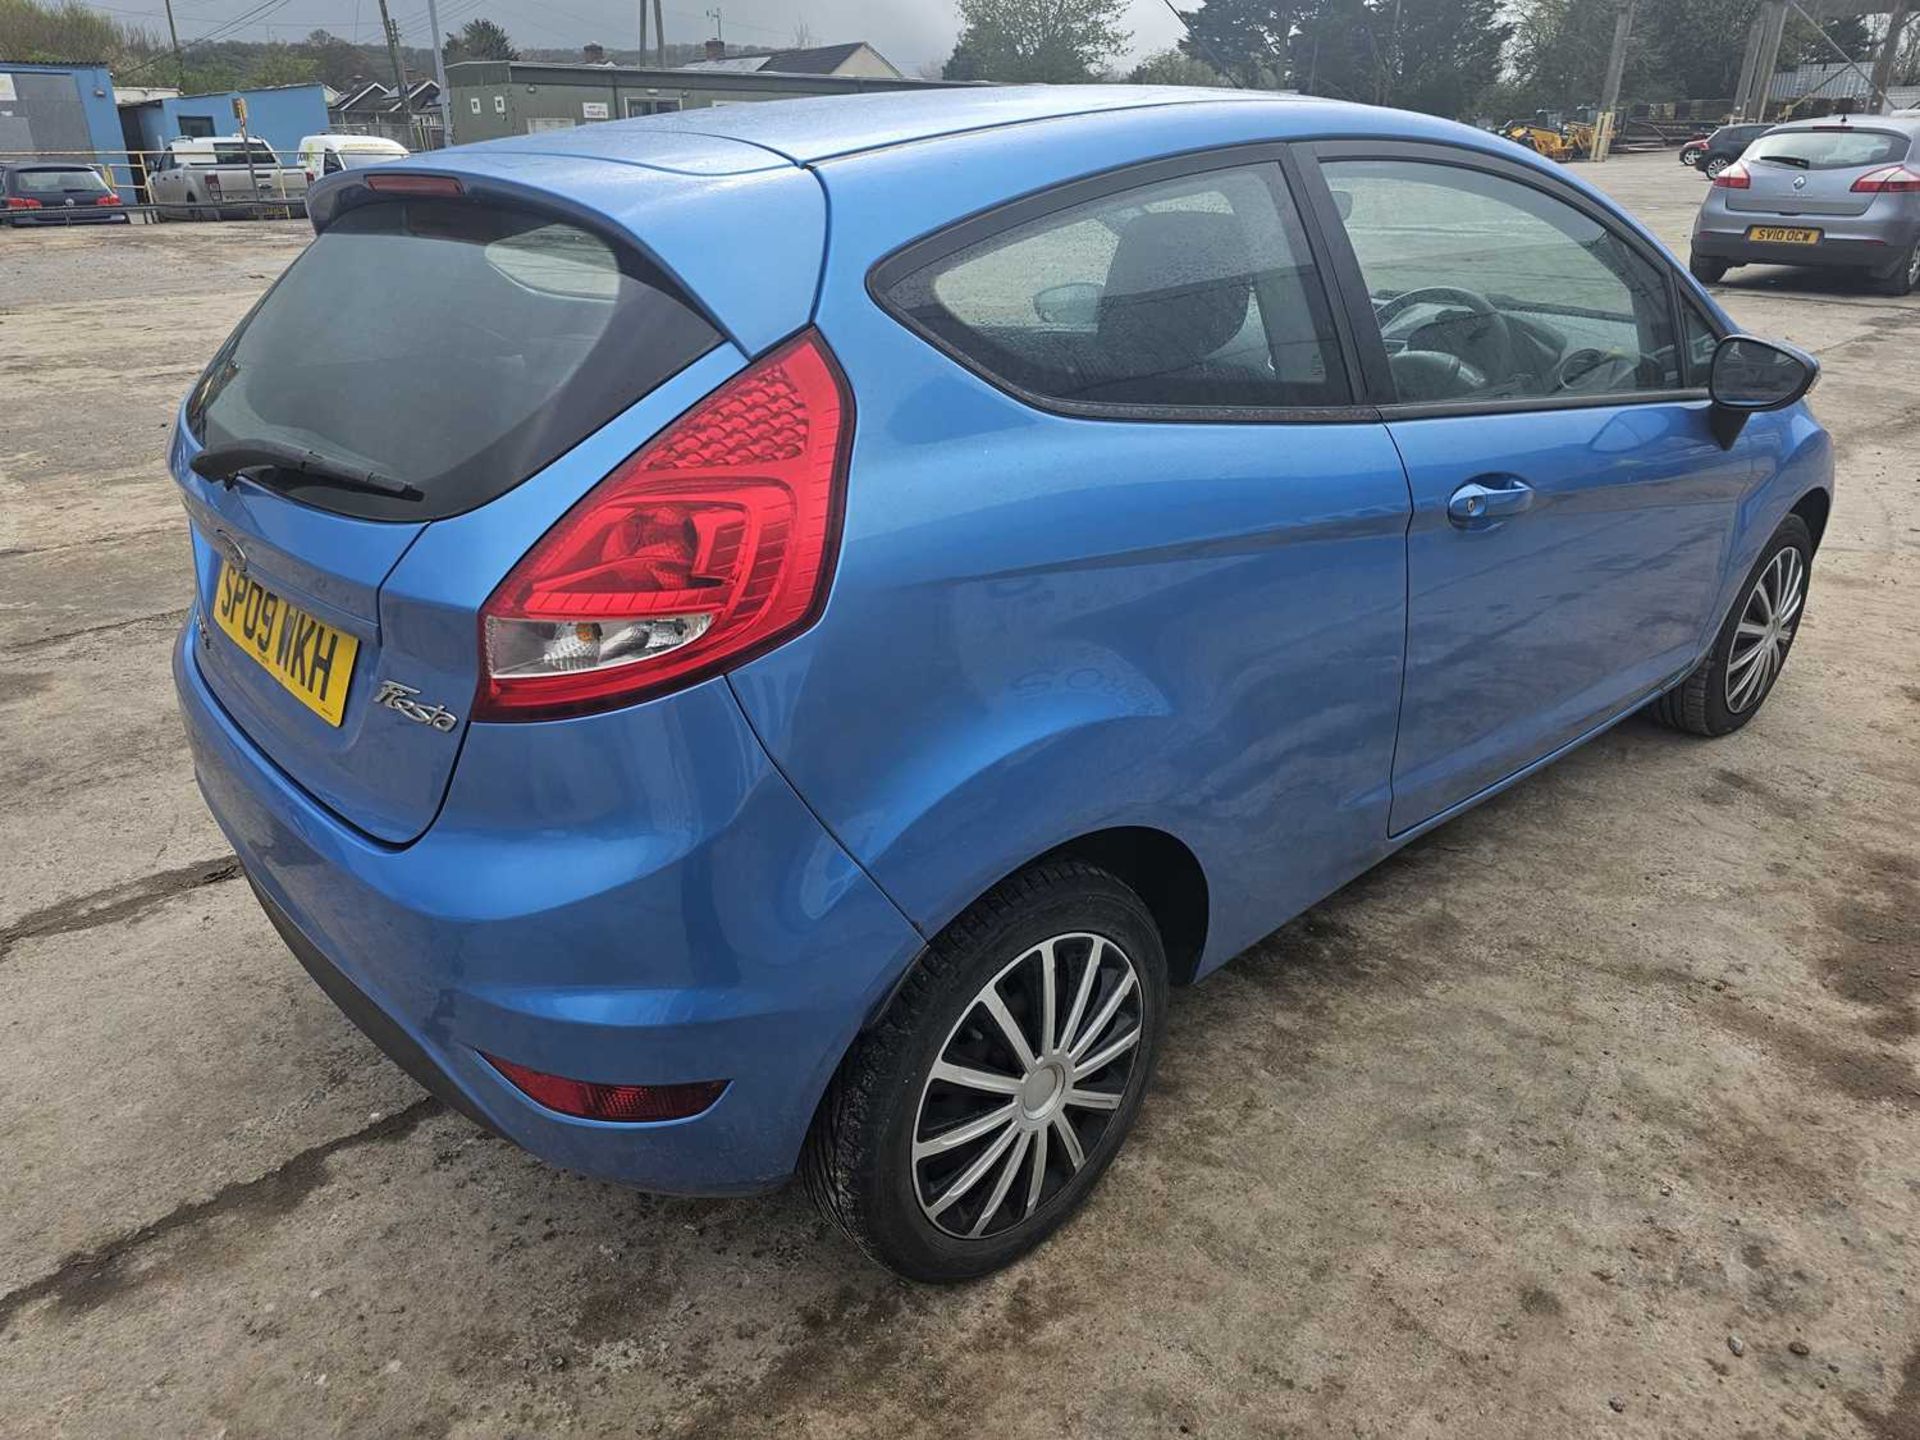 2009 Ford Fiesta Style 82, 5 Speed (Reg. Docs. Available) - Image 5 of 25